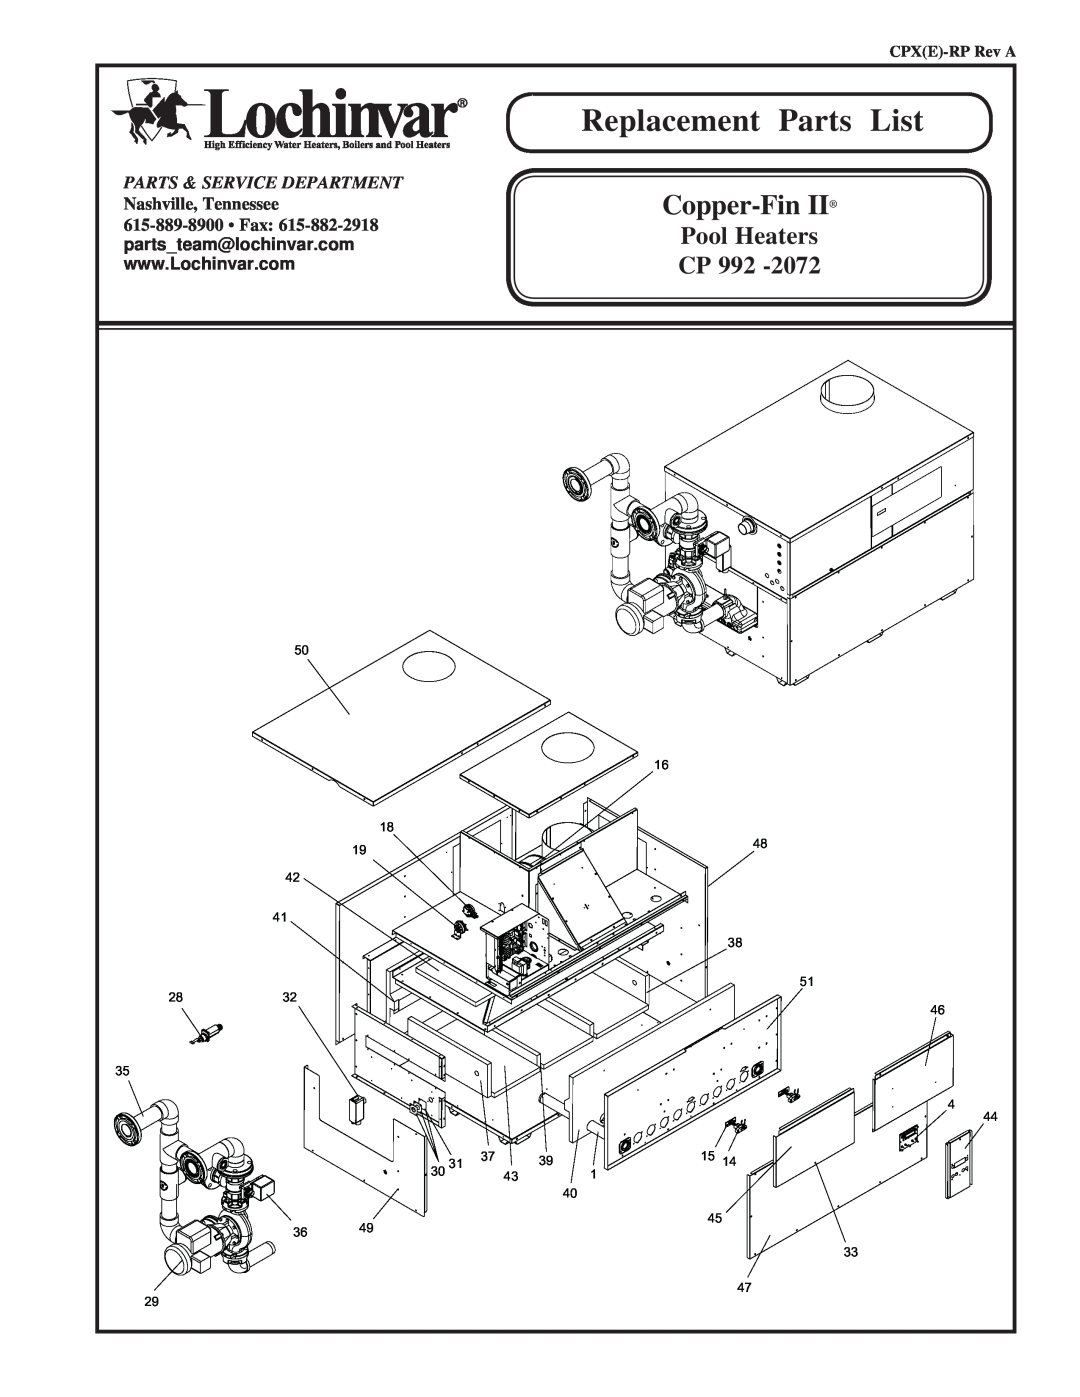 Lochinvar CP 992 -2072 manual Replacement, List, Copper-FinII, Pool Heaters, Cp, Parts & Service Department 